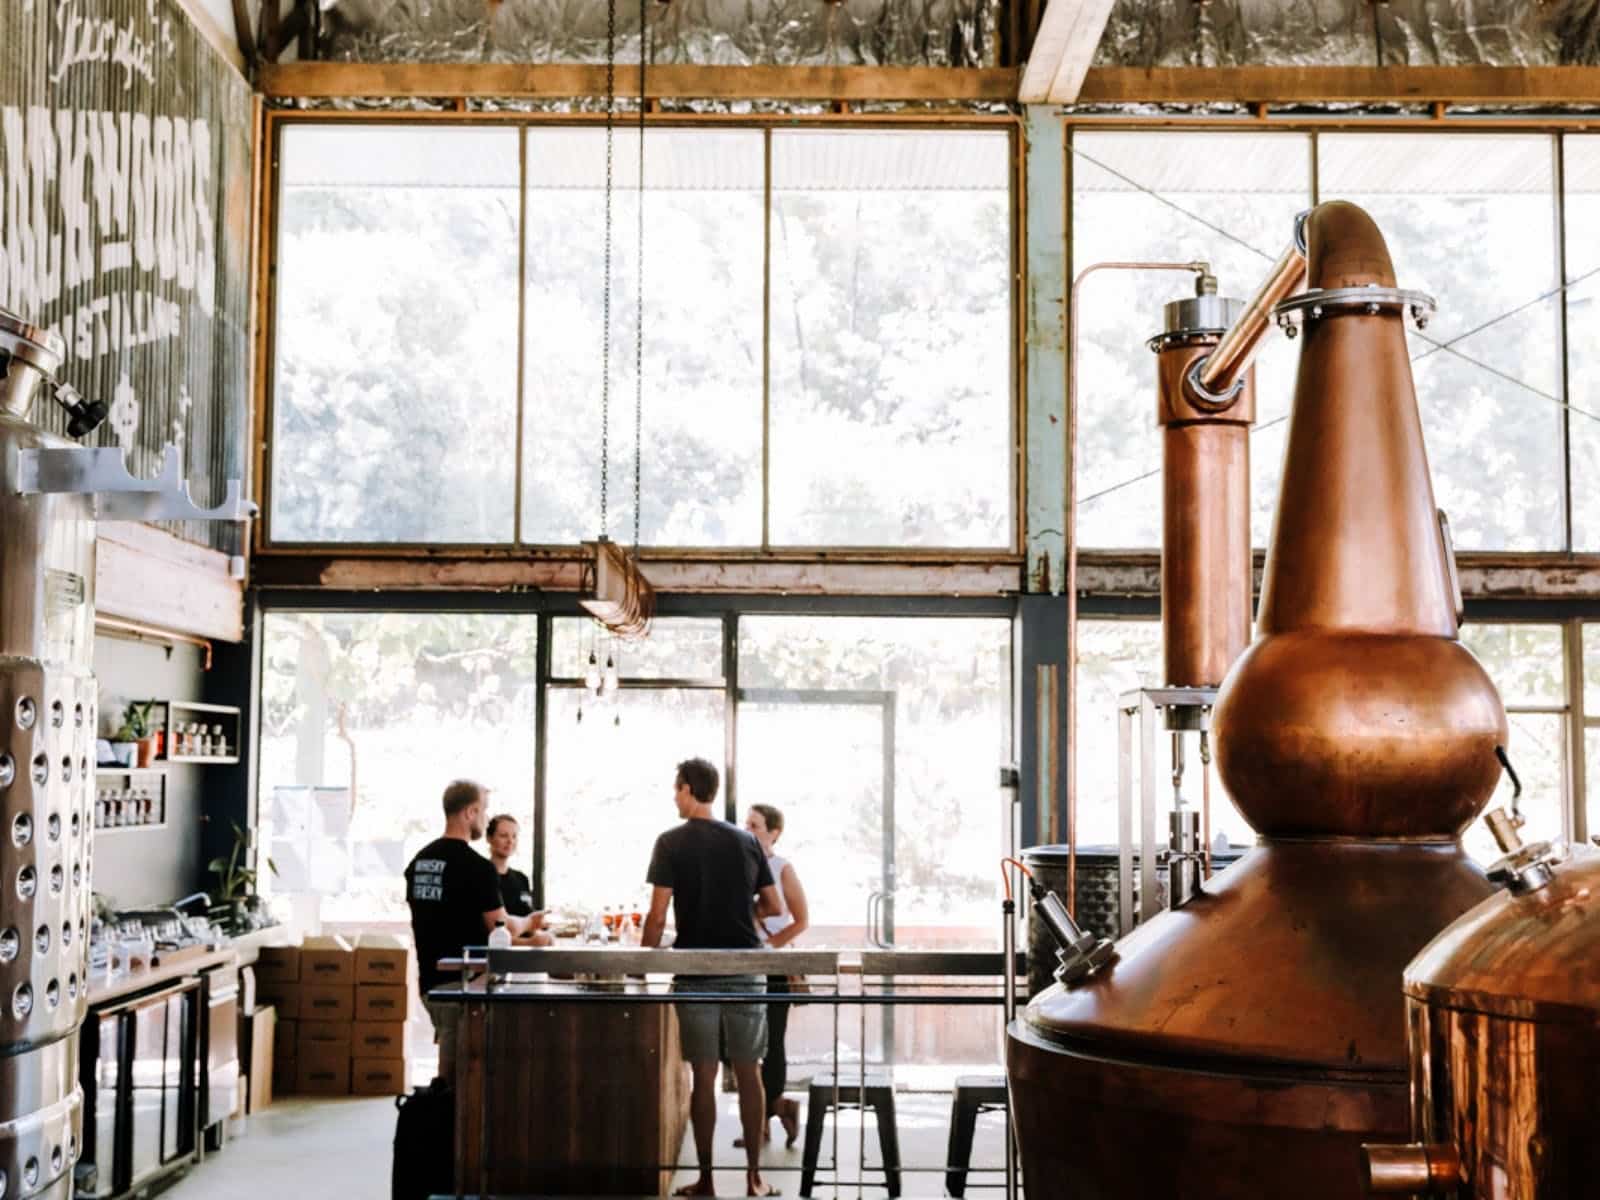 View of the tasting room with the copper stills